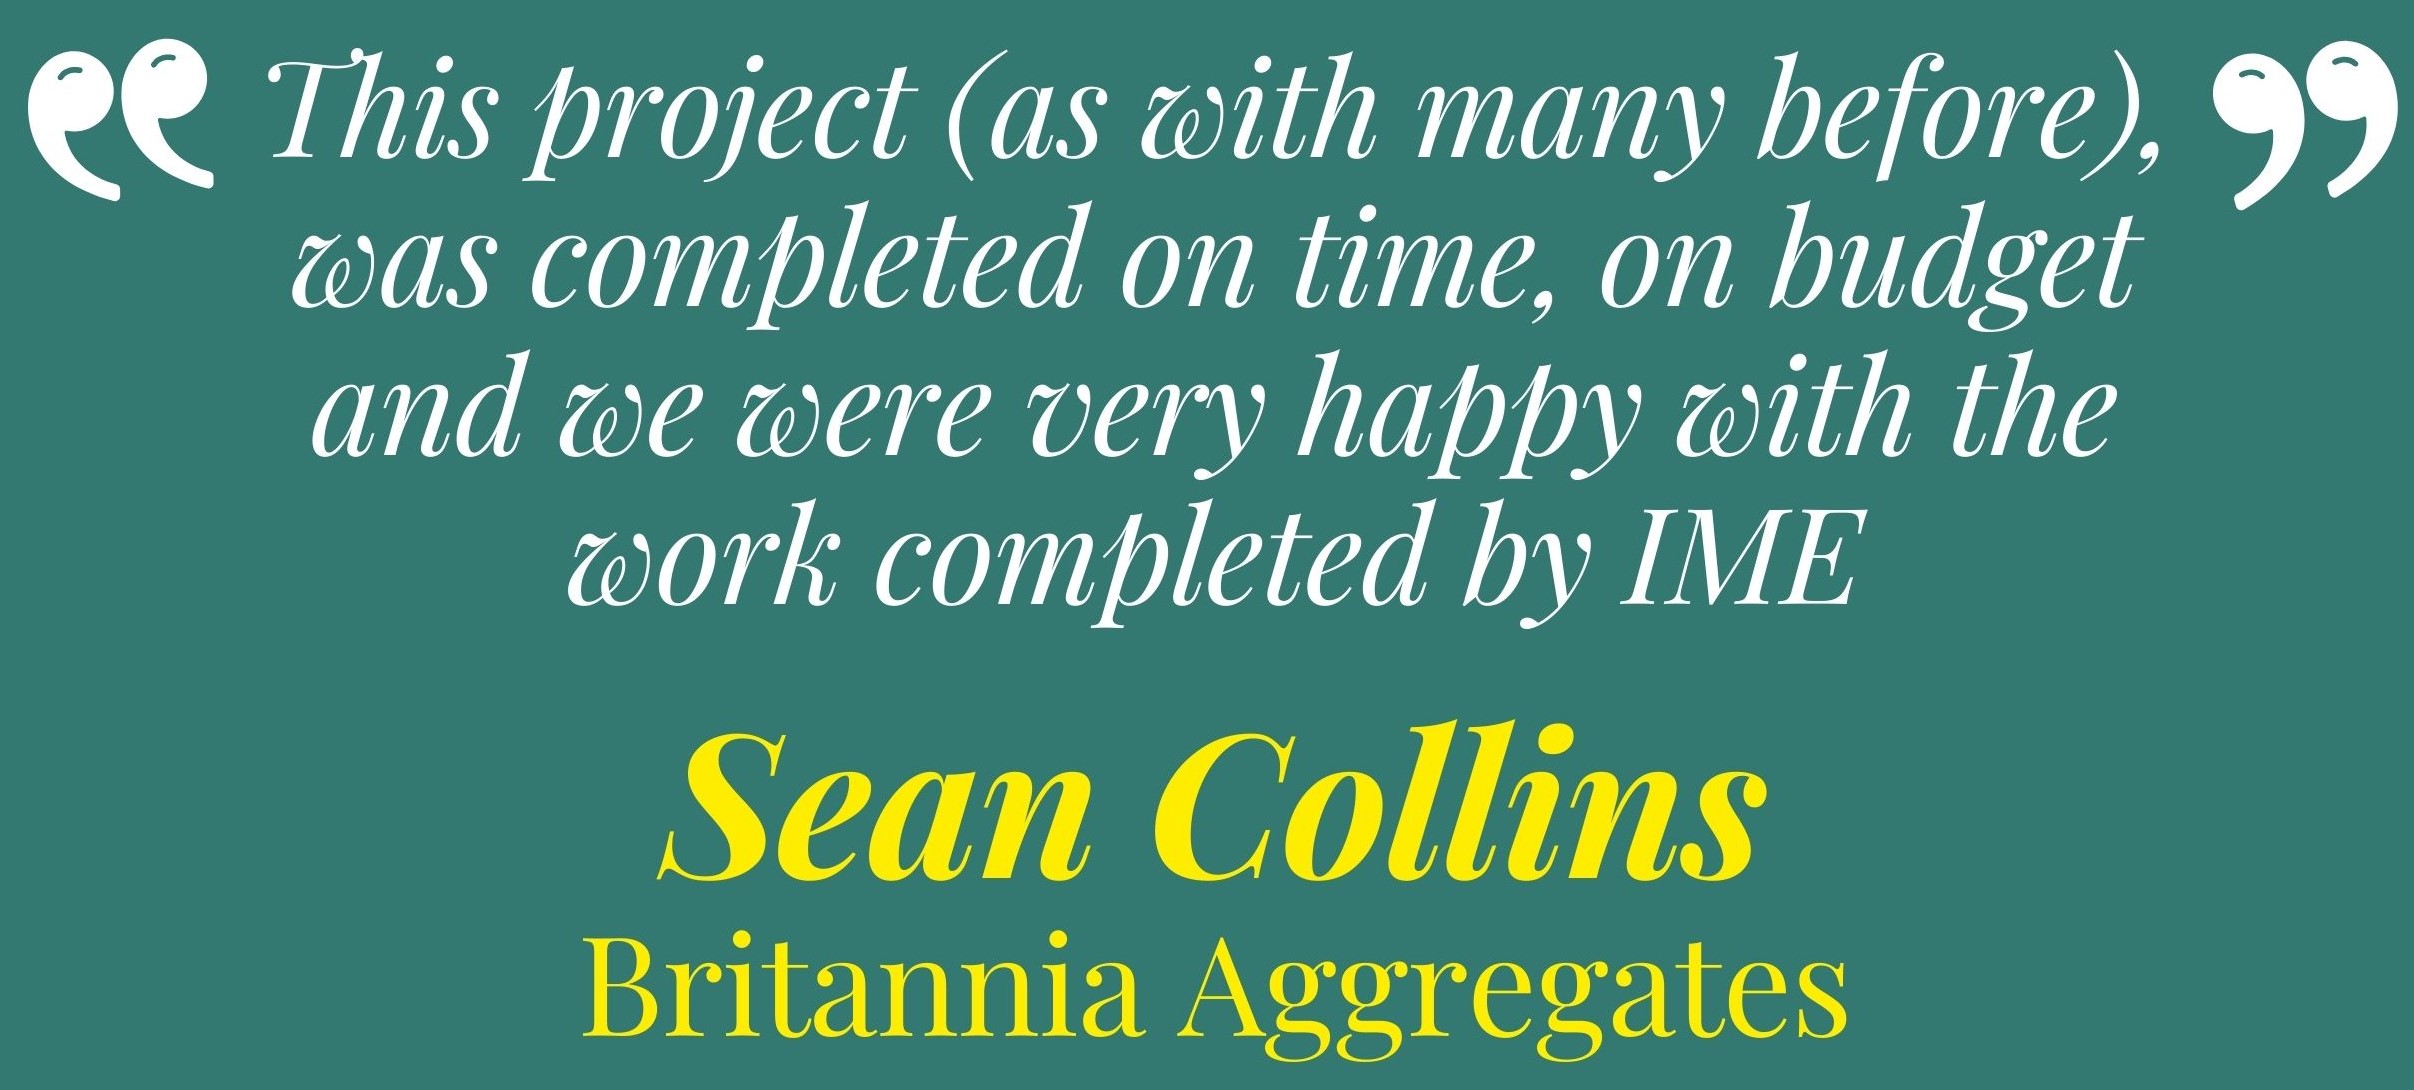 The IME Group - Client Feedback from Sean Collins at Britannia Aggregates